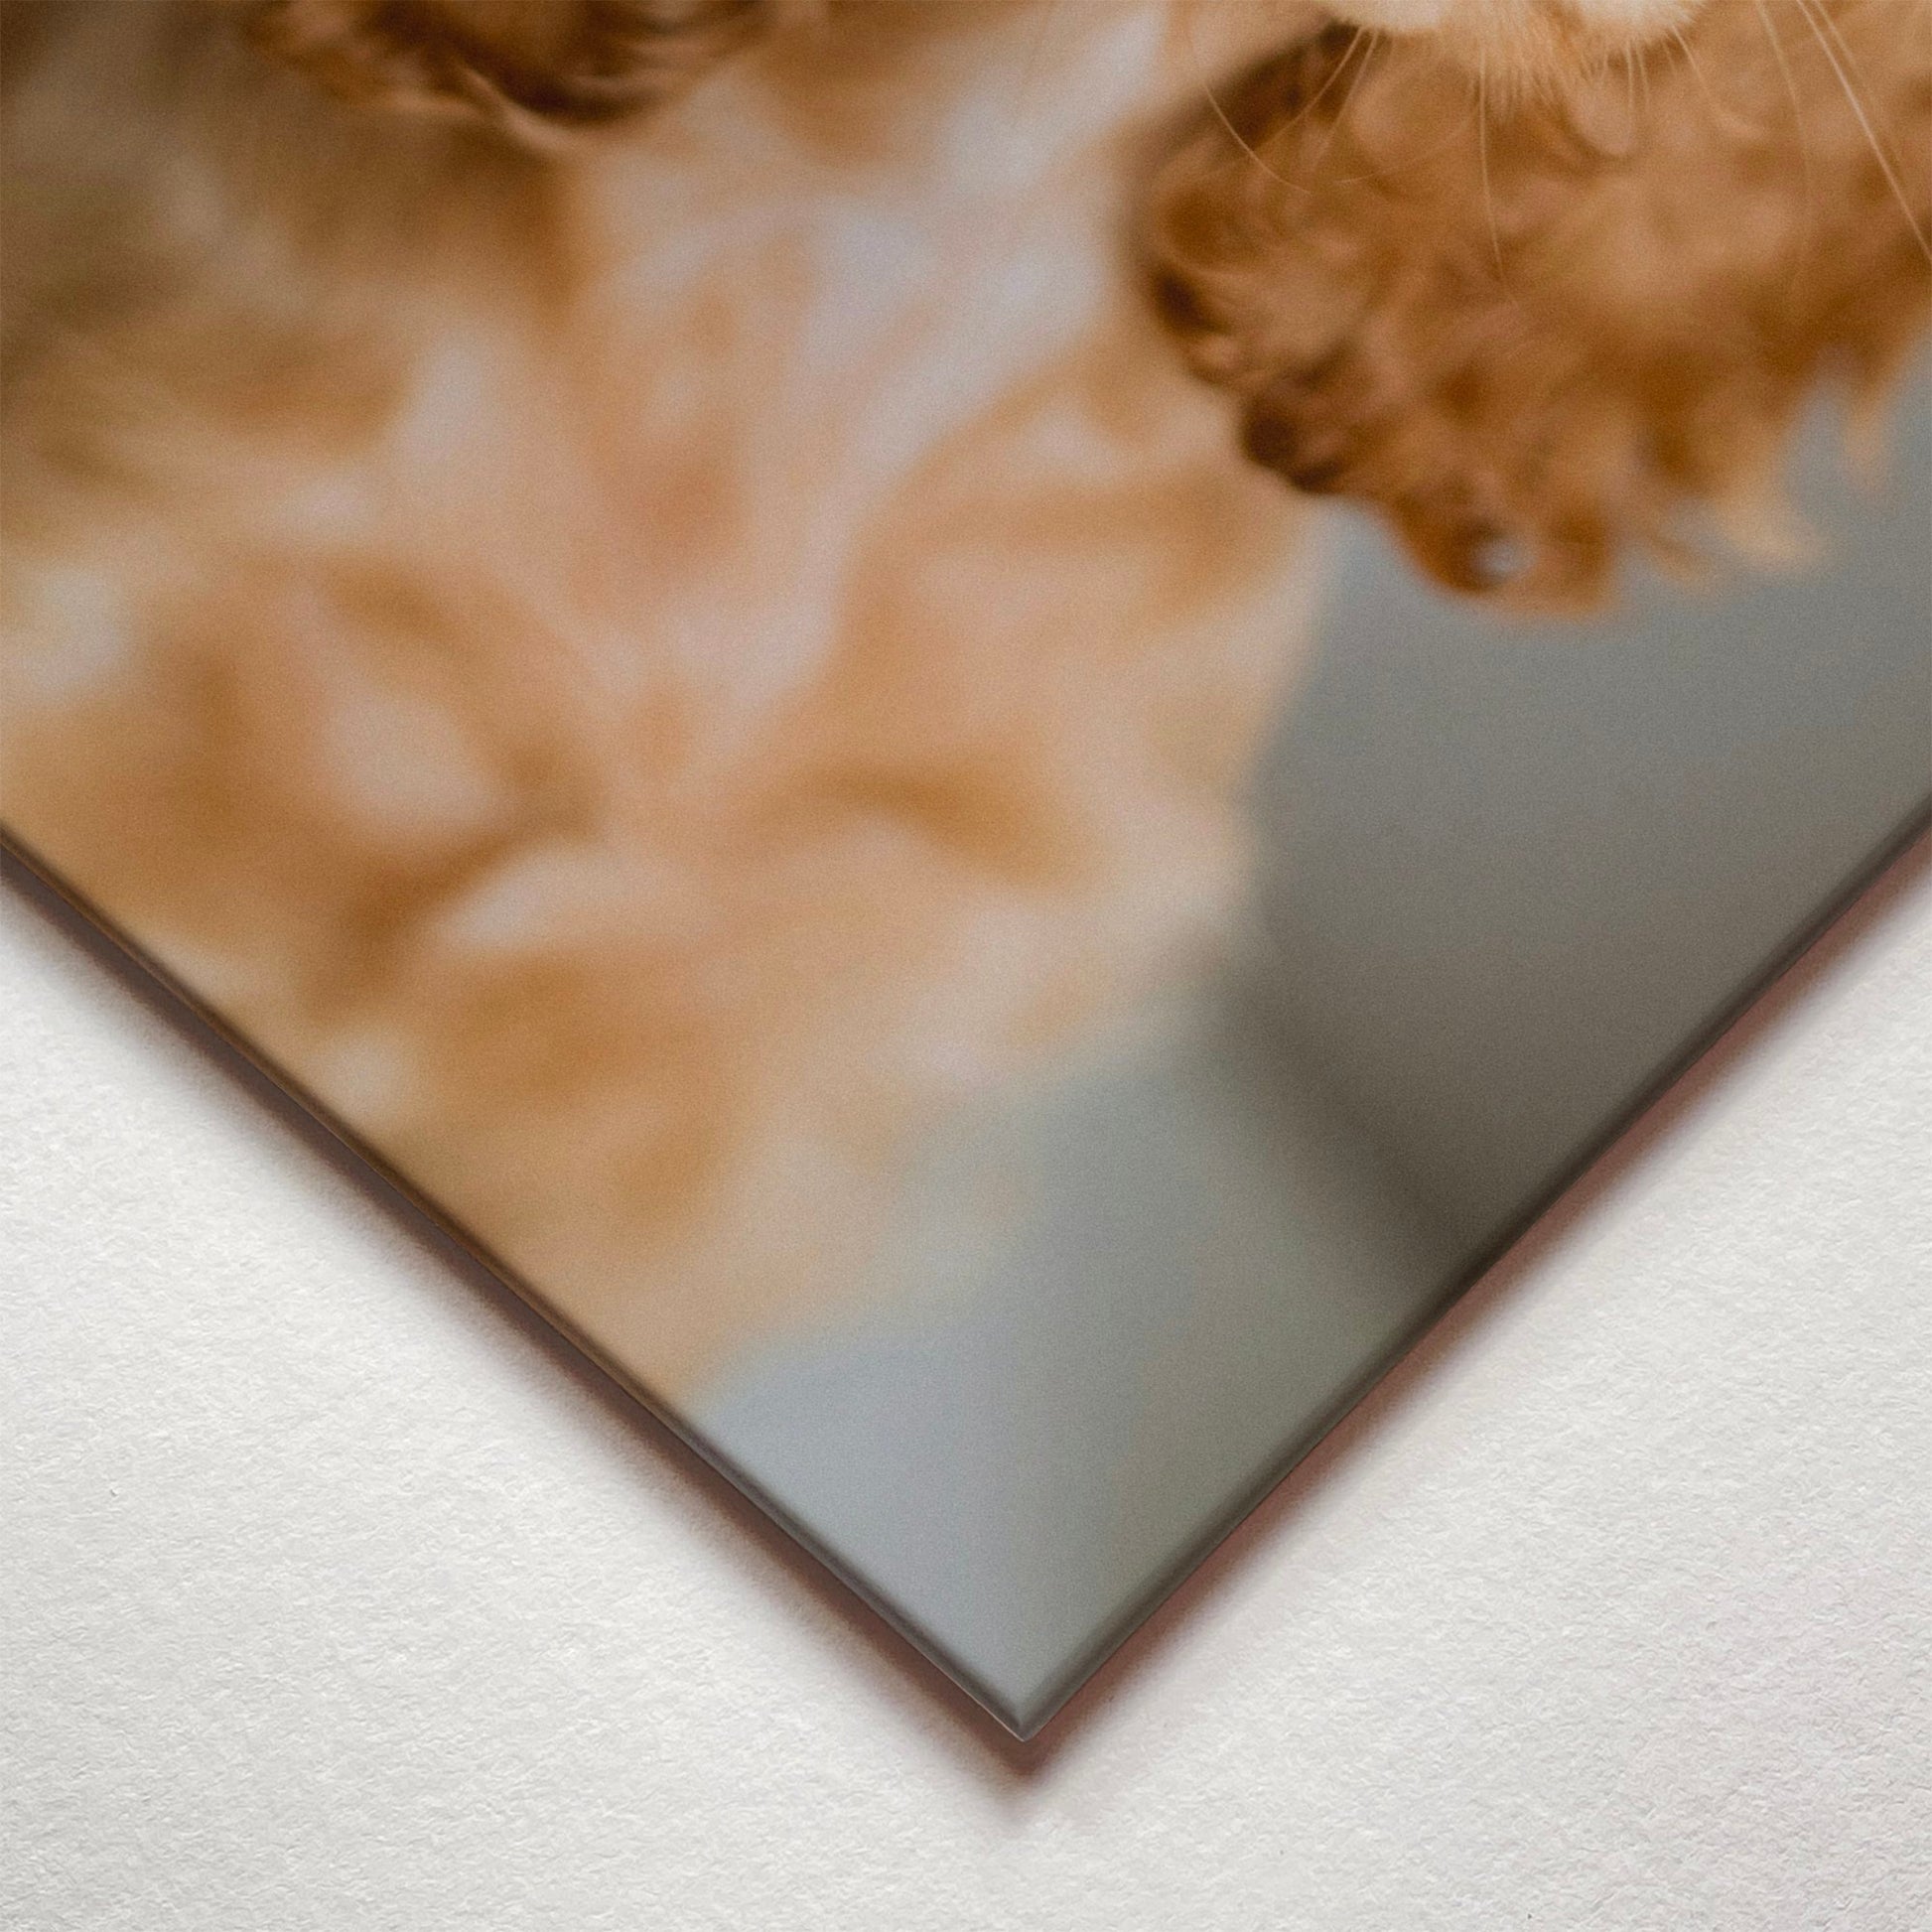 A closeup corner detail view of a metal art poster display plate with printed design of a Cute Golden Cocker Spaniel